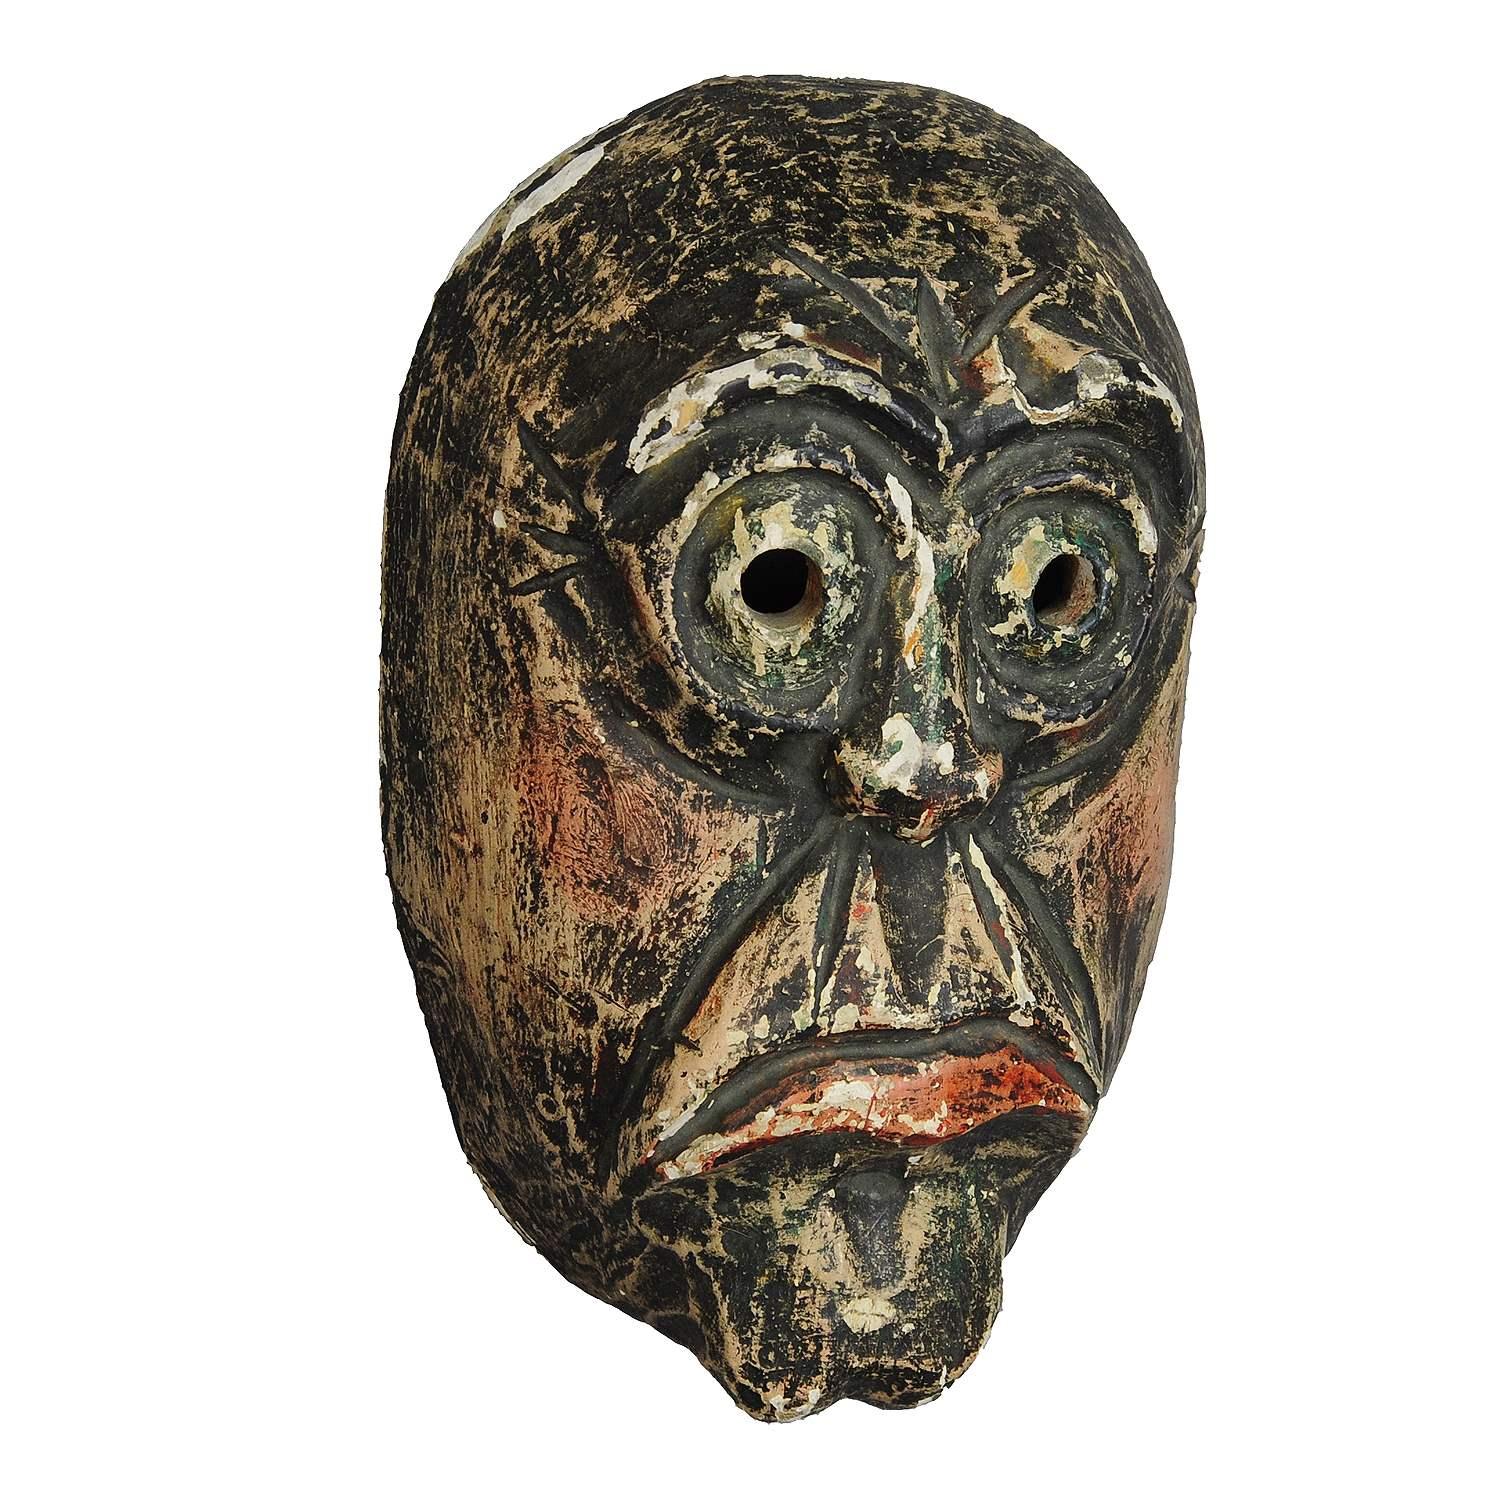 Traditional handcarved and painted tyrolian carnival mask

An nice antique wooden carved carnival mask which comes from the region of South Tyrol. Made of handcarved and handpainted pine wood in the 1. half 20th. century. Until today these masks are